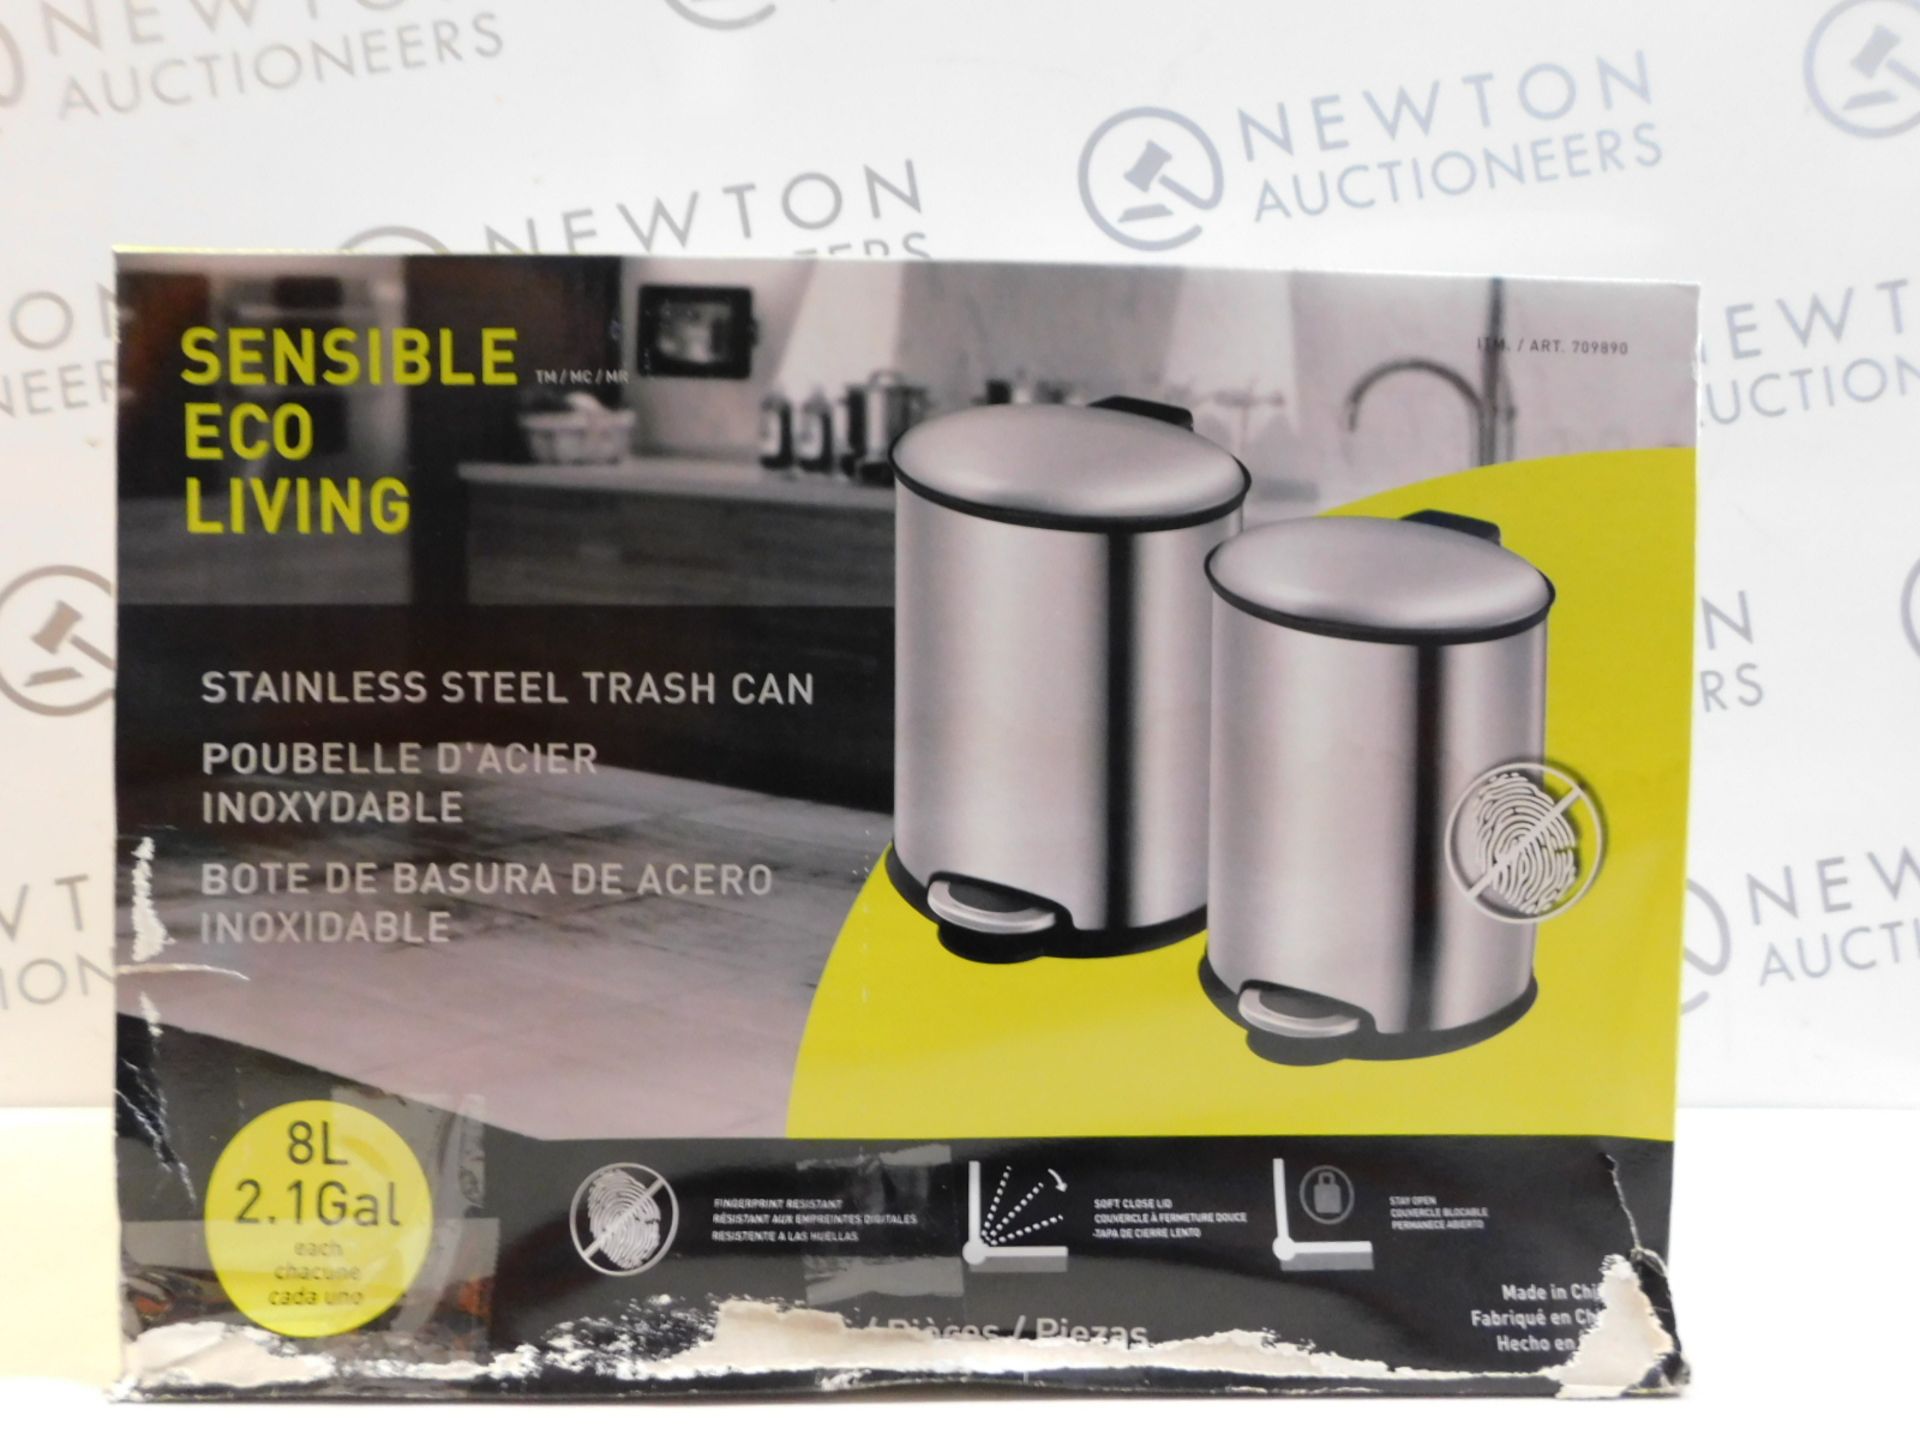 1 BOXED SET OF 2 SENSIBLE ECO LIVING STAINLESS STEEL PEDAL BINS RRP £39.99